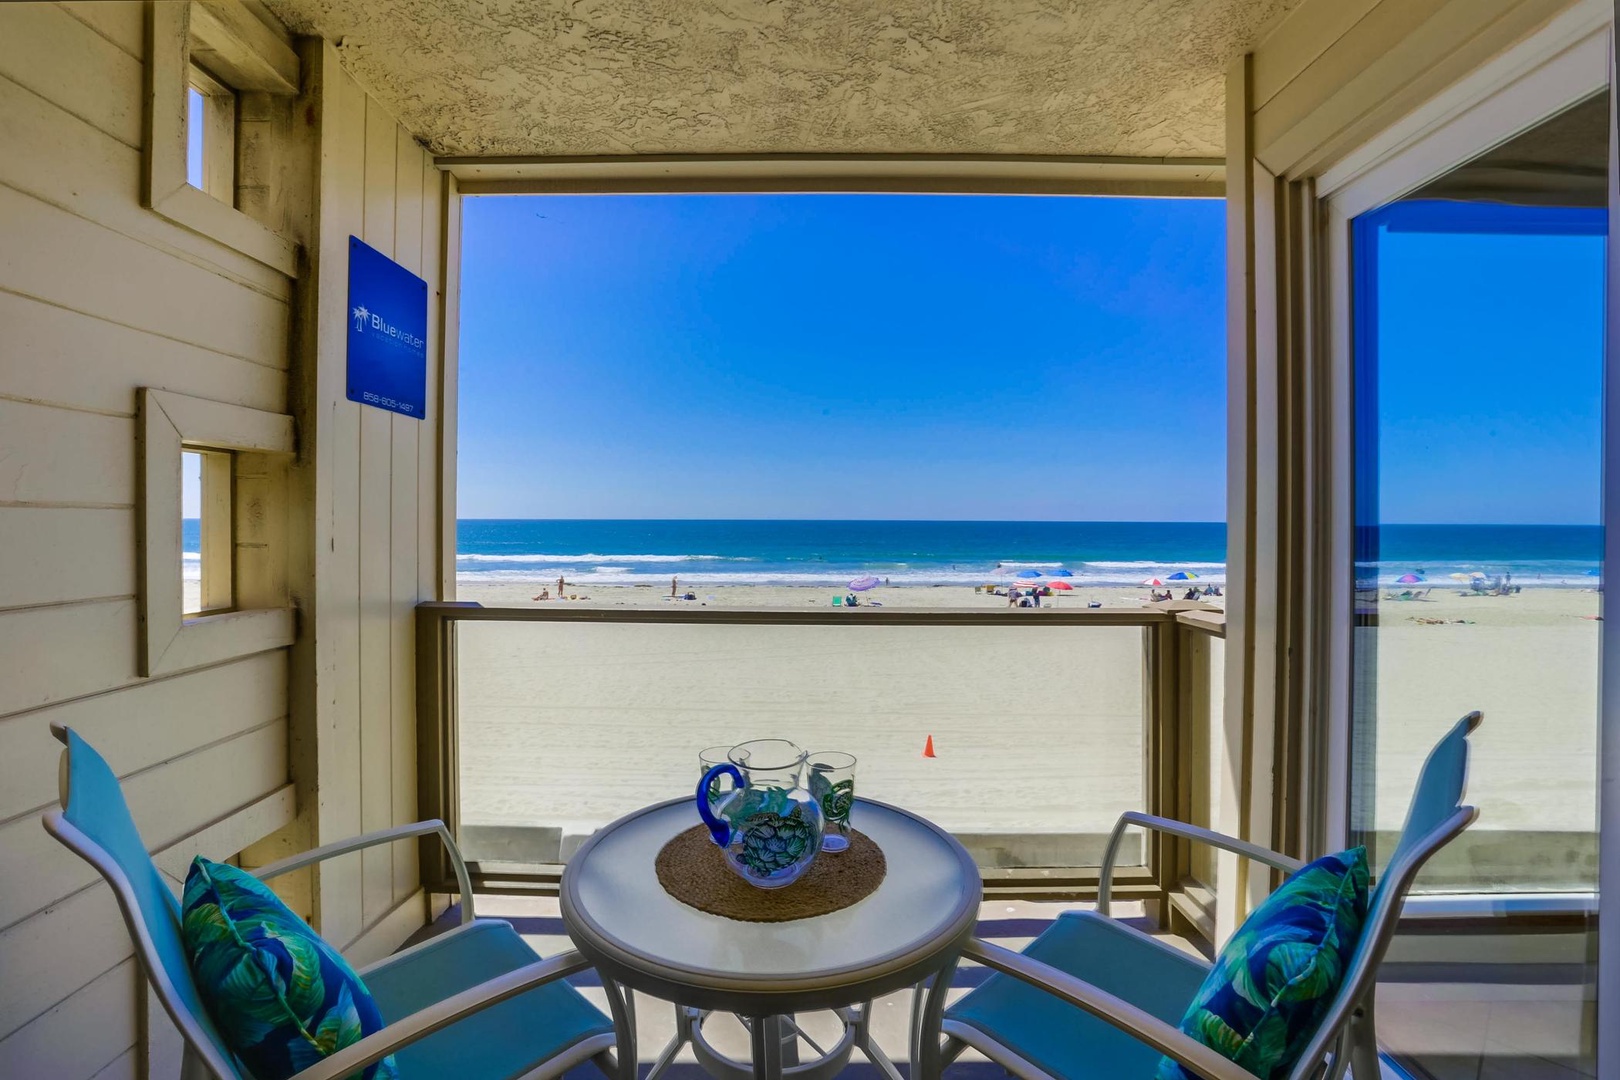 Ocean view patio for surf gazing